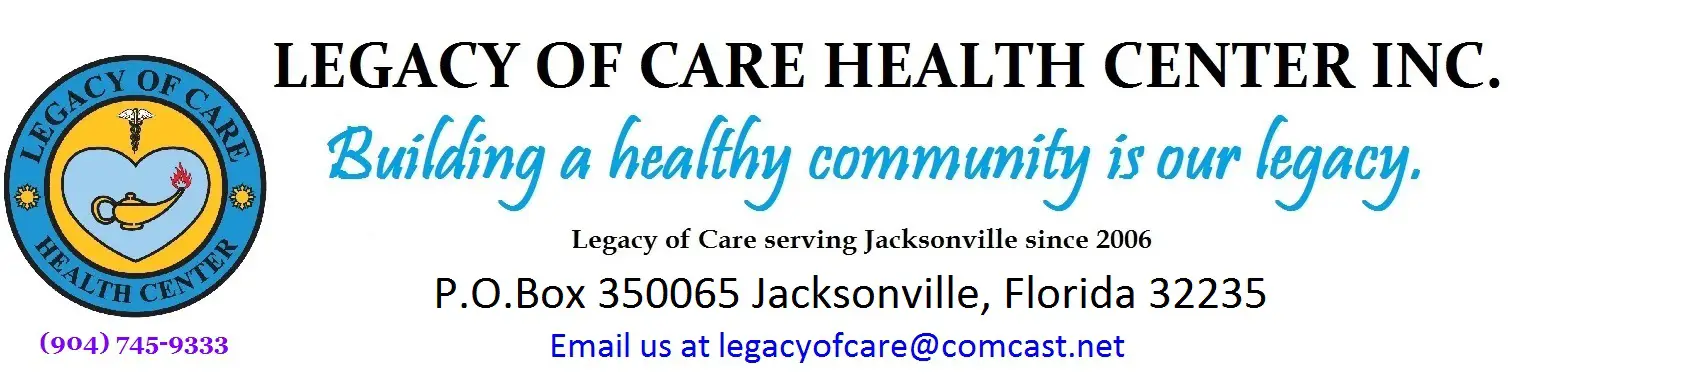 Legacy of Care Health Center